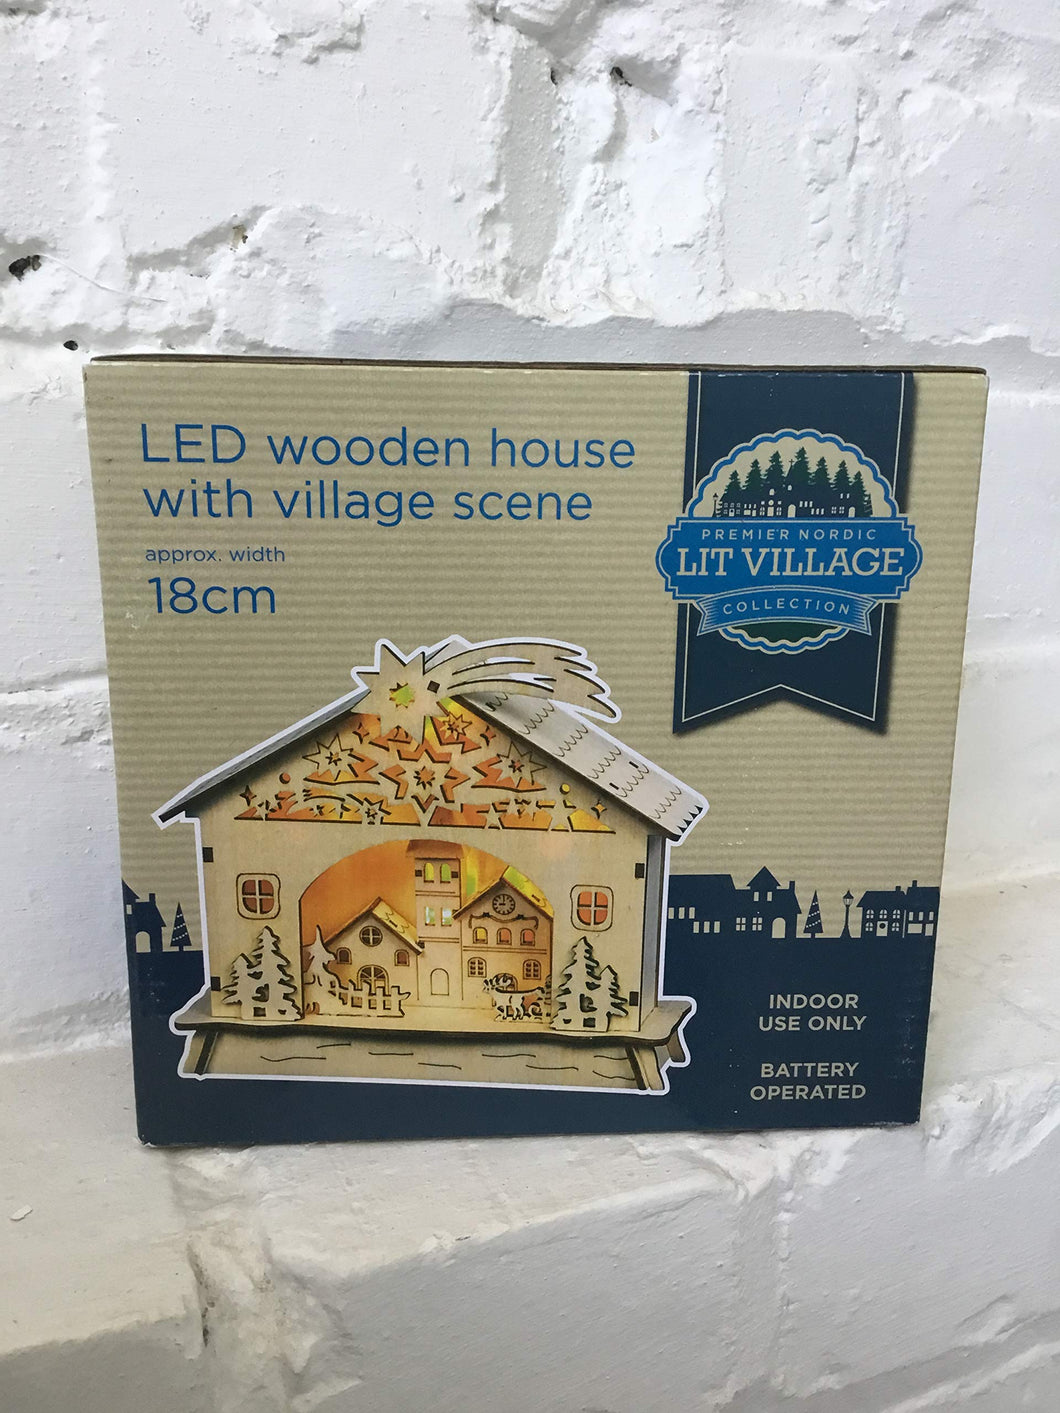 18cm LED wooden house with village scene, battery operated